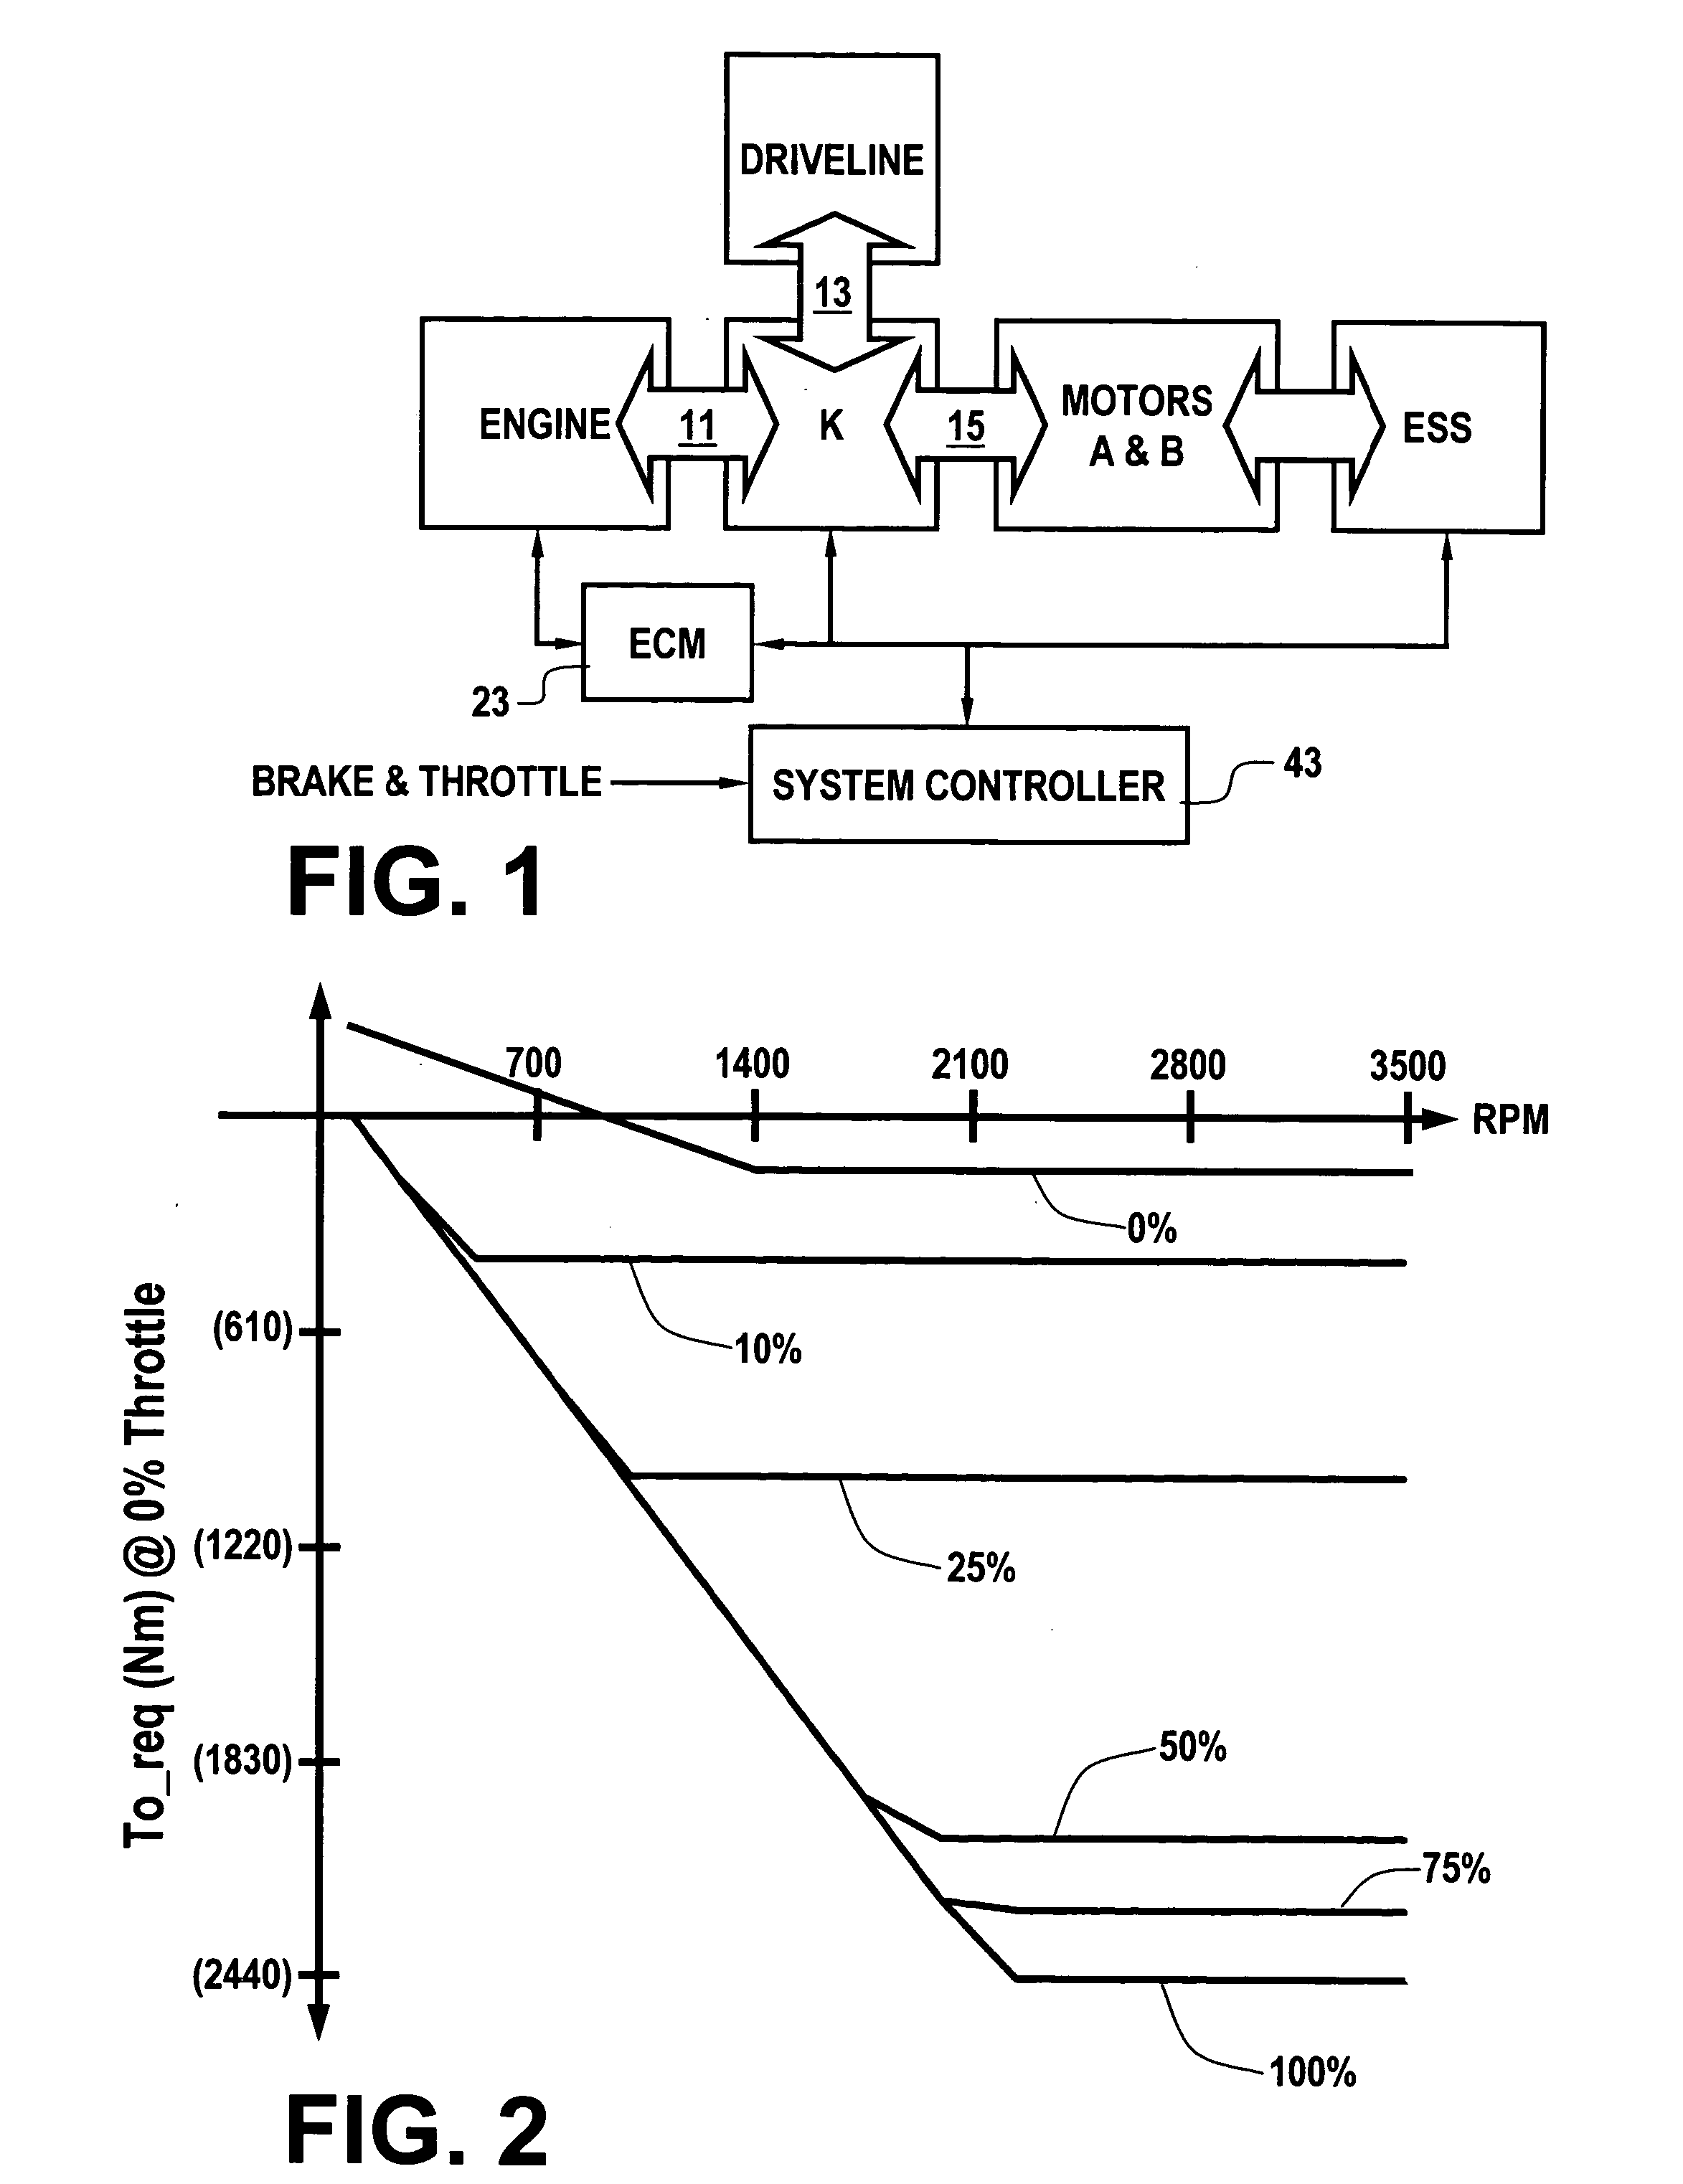 Engine retard operation scheduling and management in a hybrid vehicle